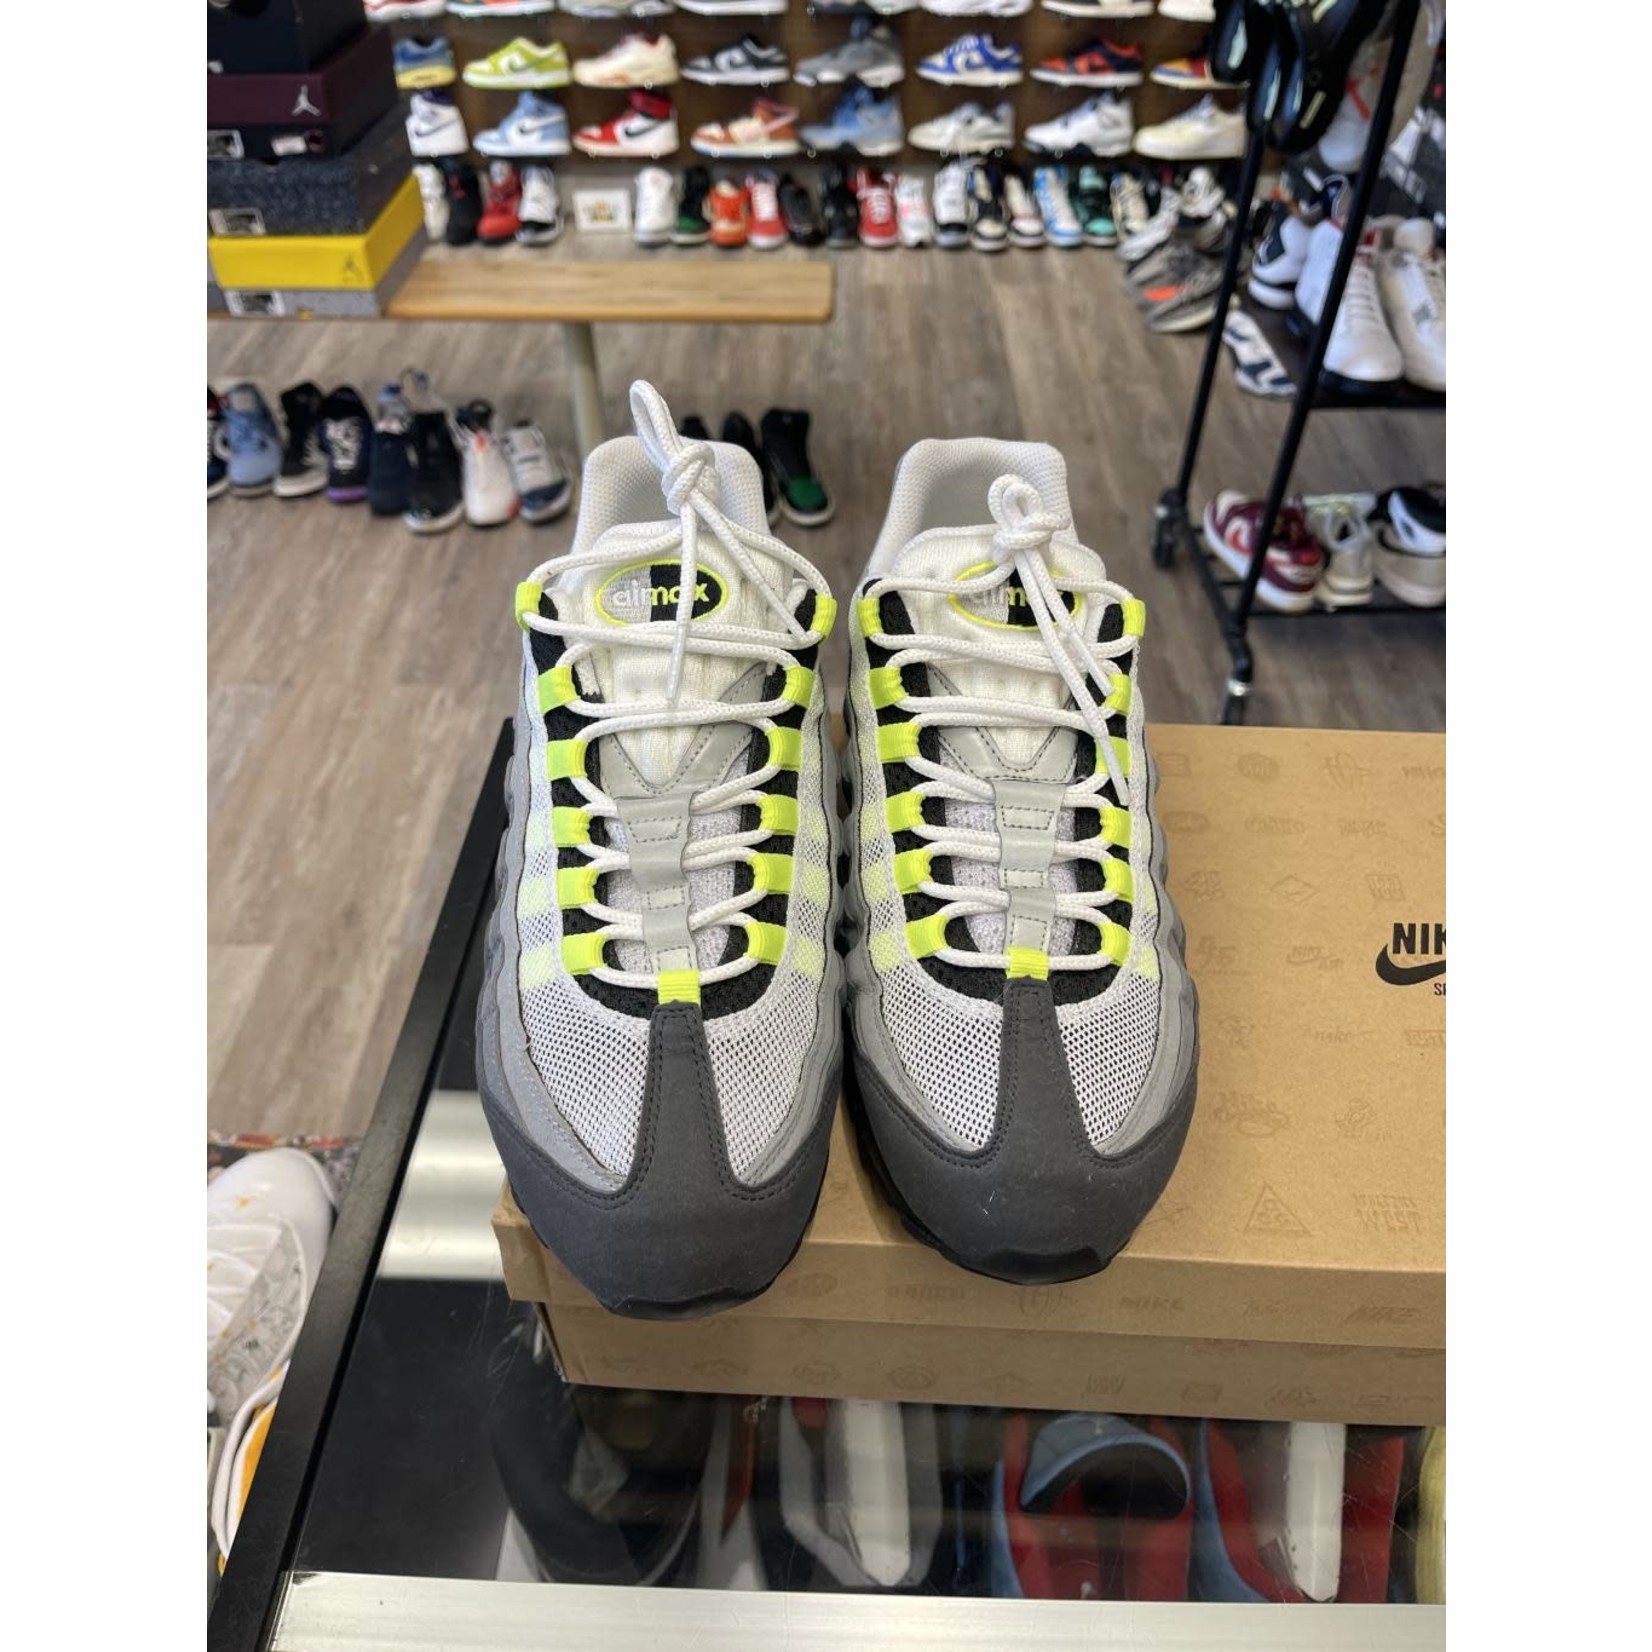 Nike Nike Air Max 95 OG Neon (2012) Size 9, PREOWNED